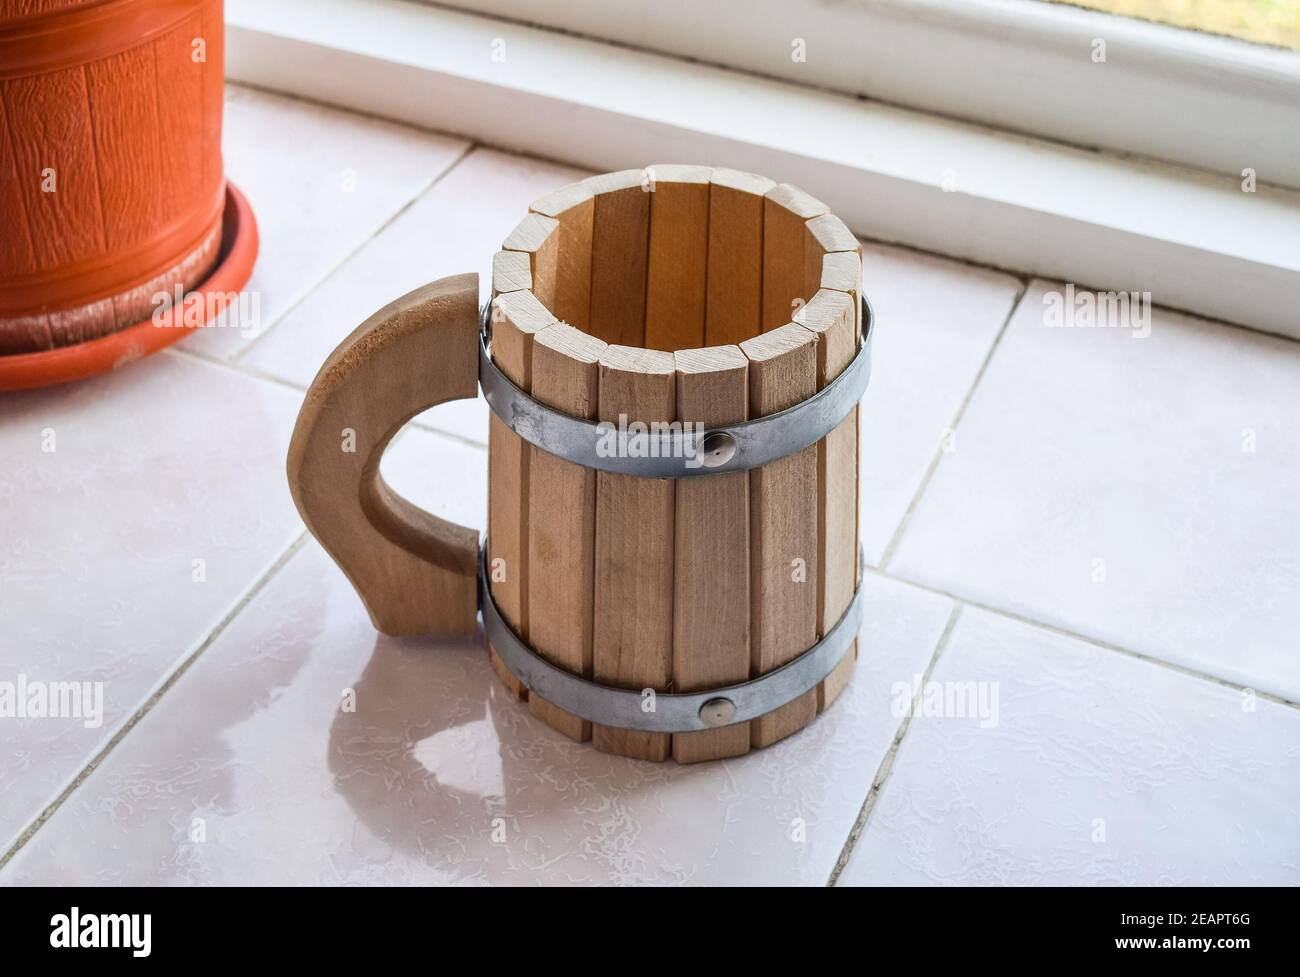 Decorative cup shaped drums. Wooden mug of beer Stock Photo